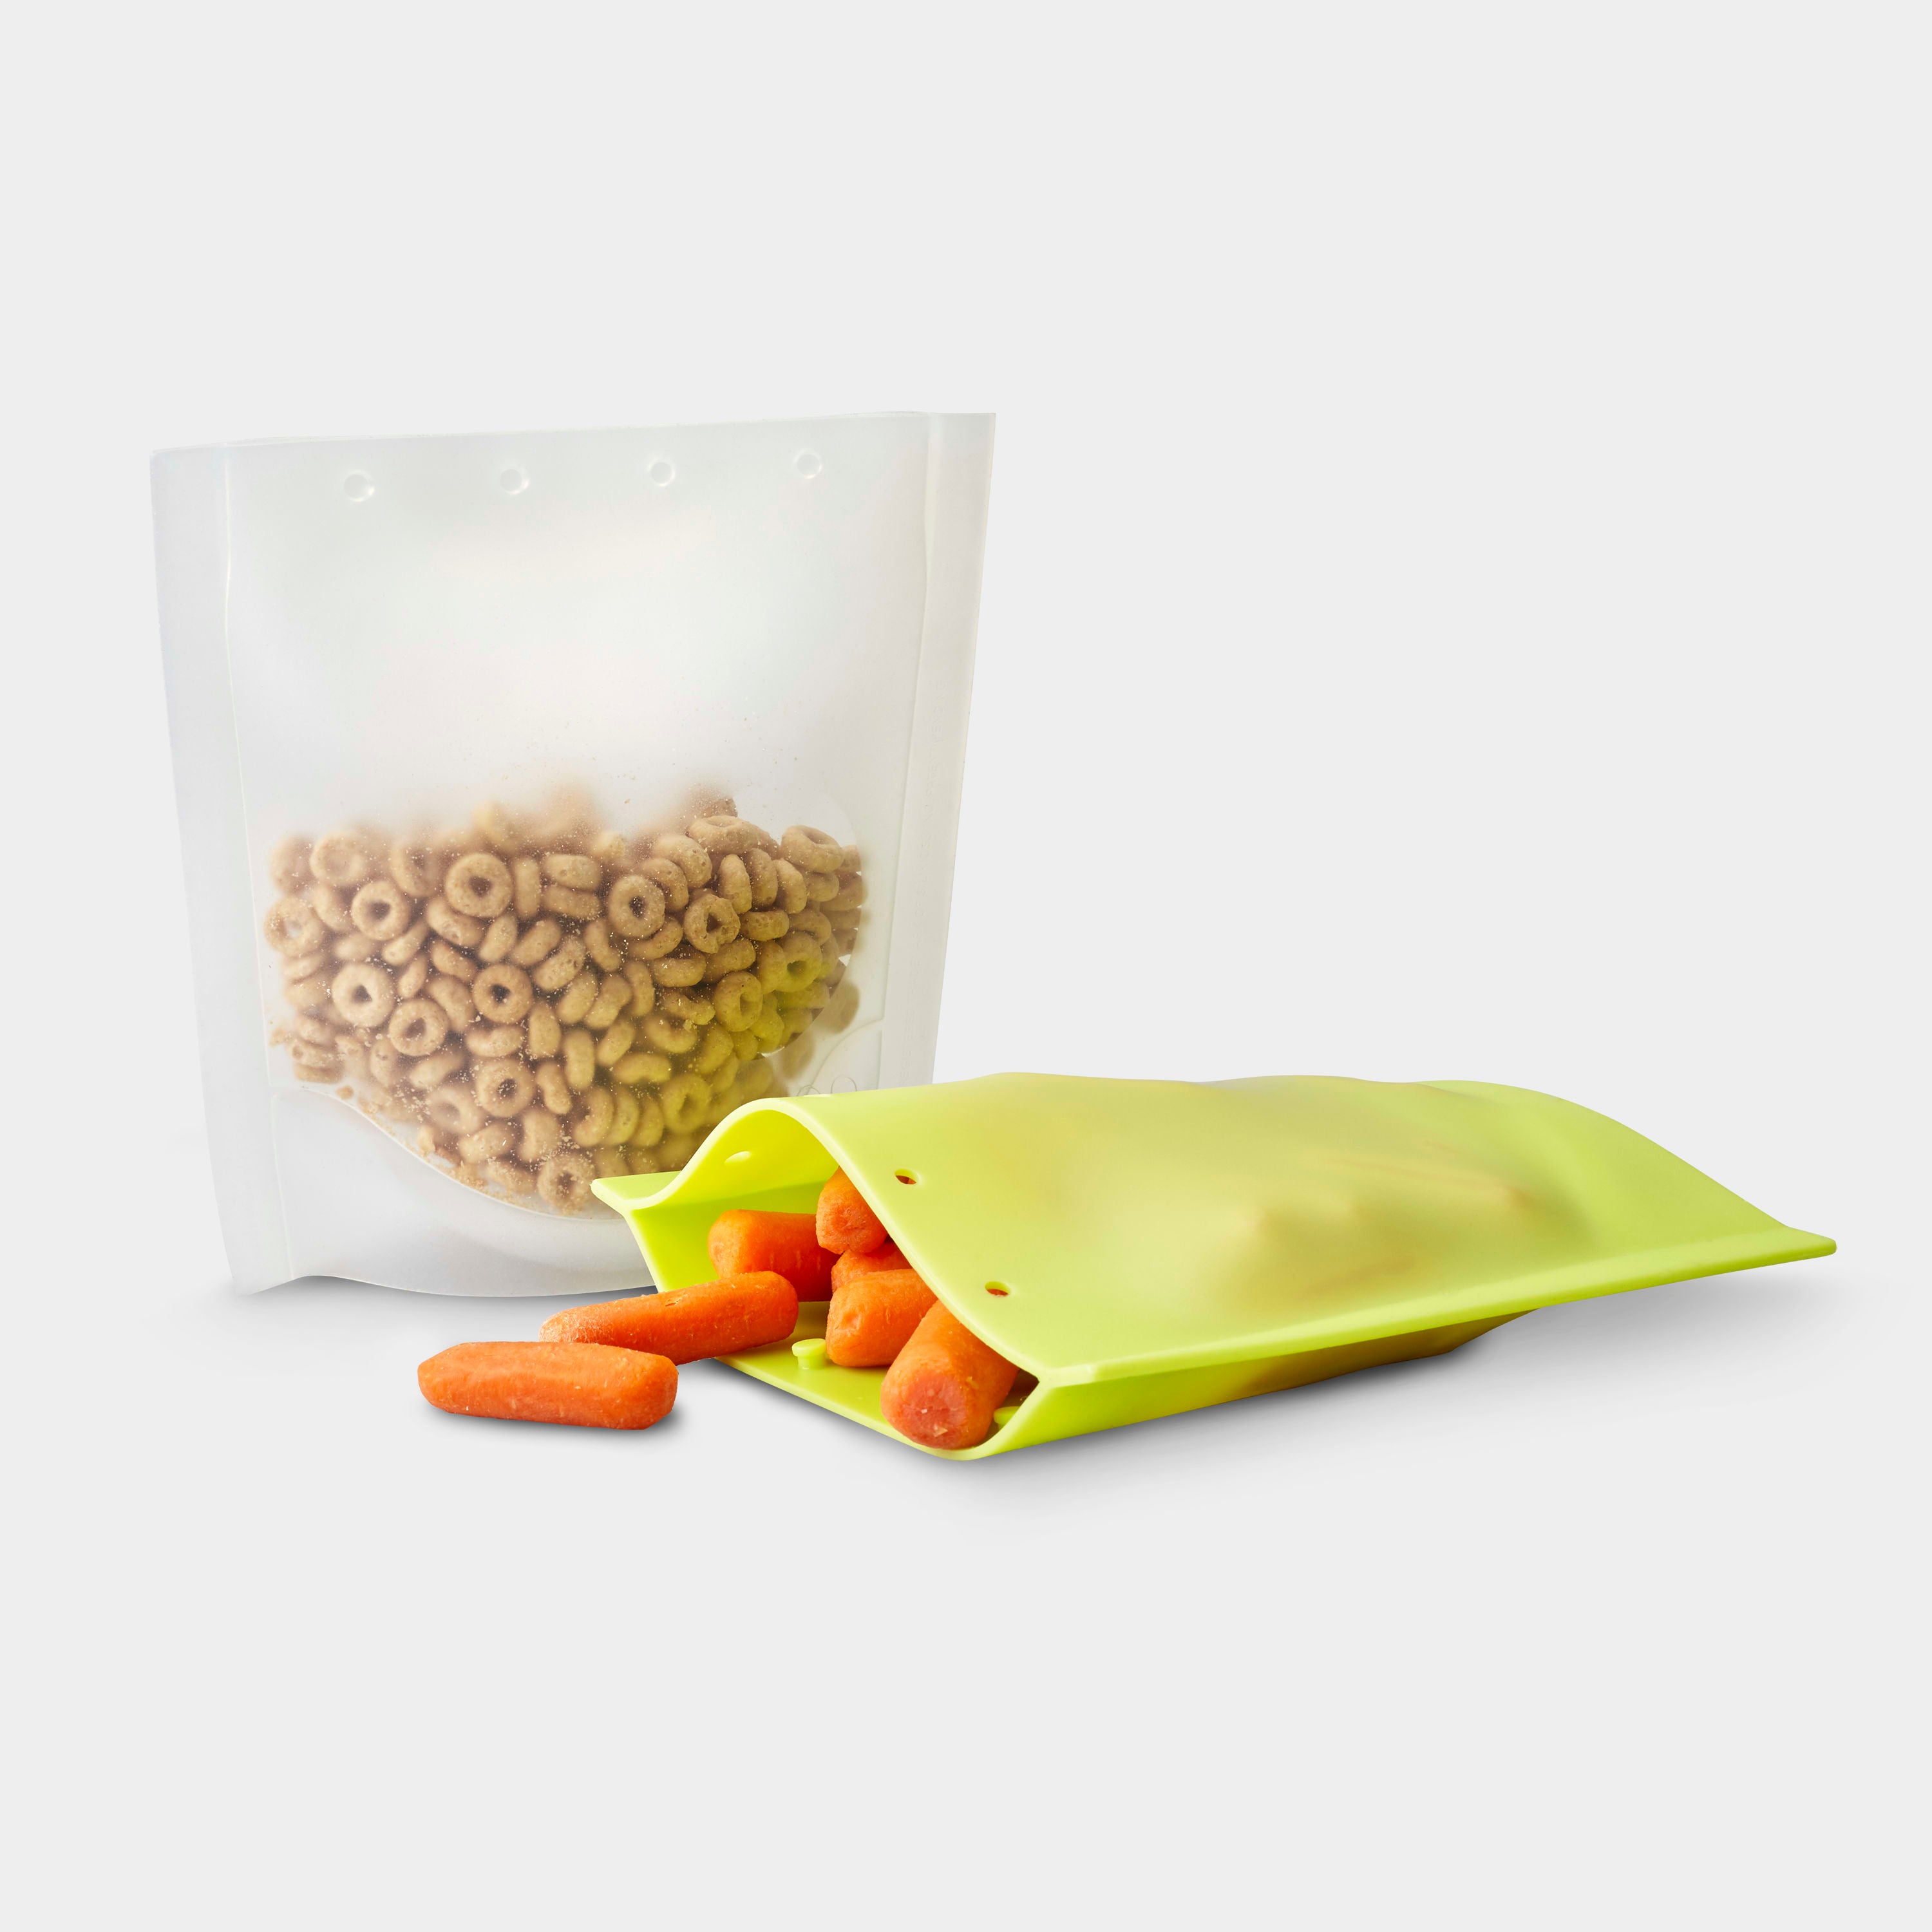 GoSili Silicone Snack Bags - 2 Pack